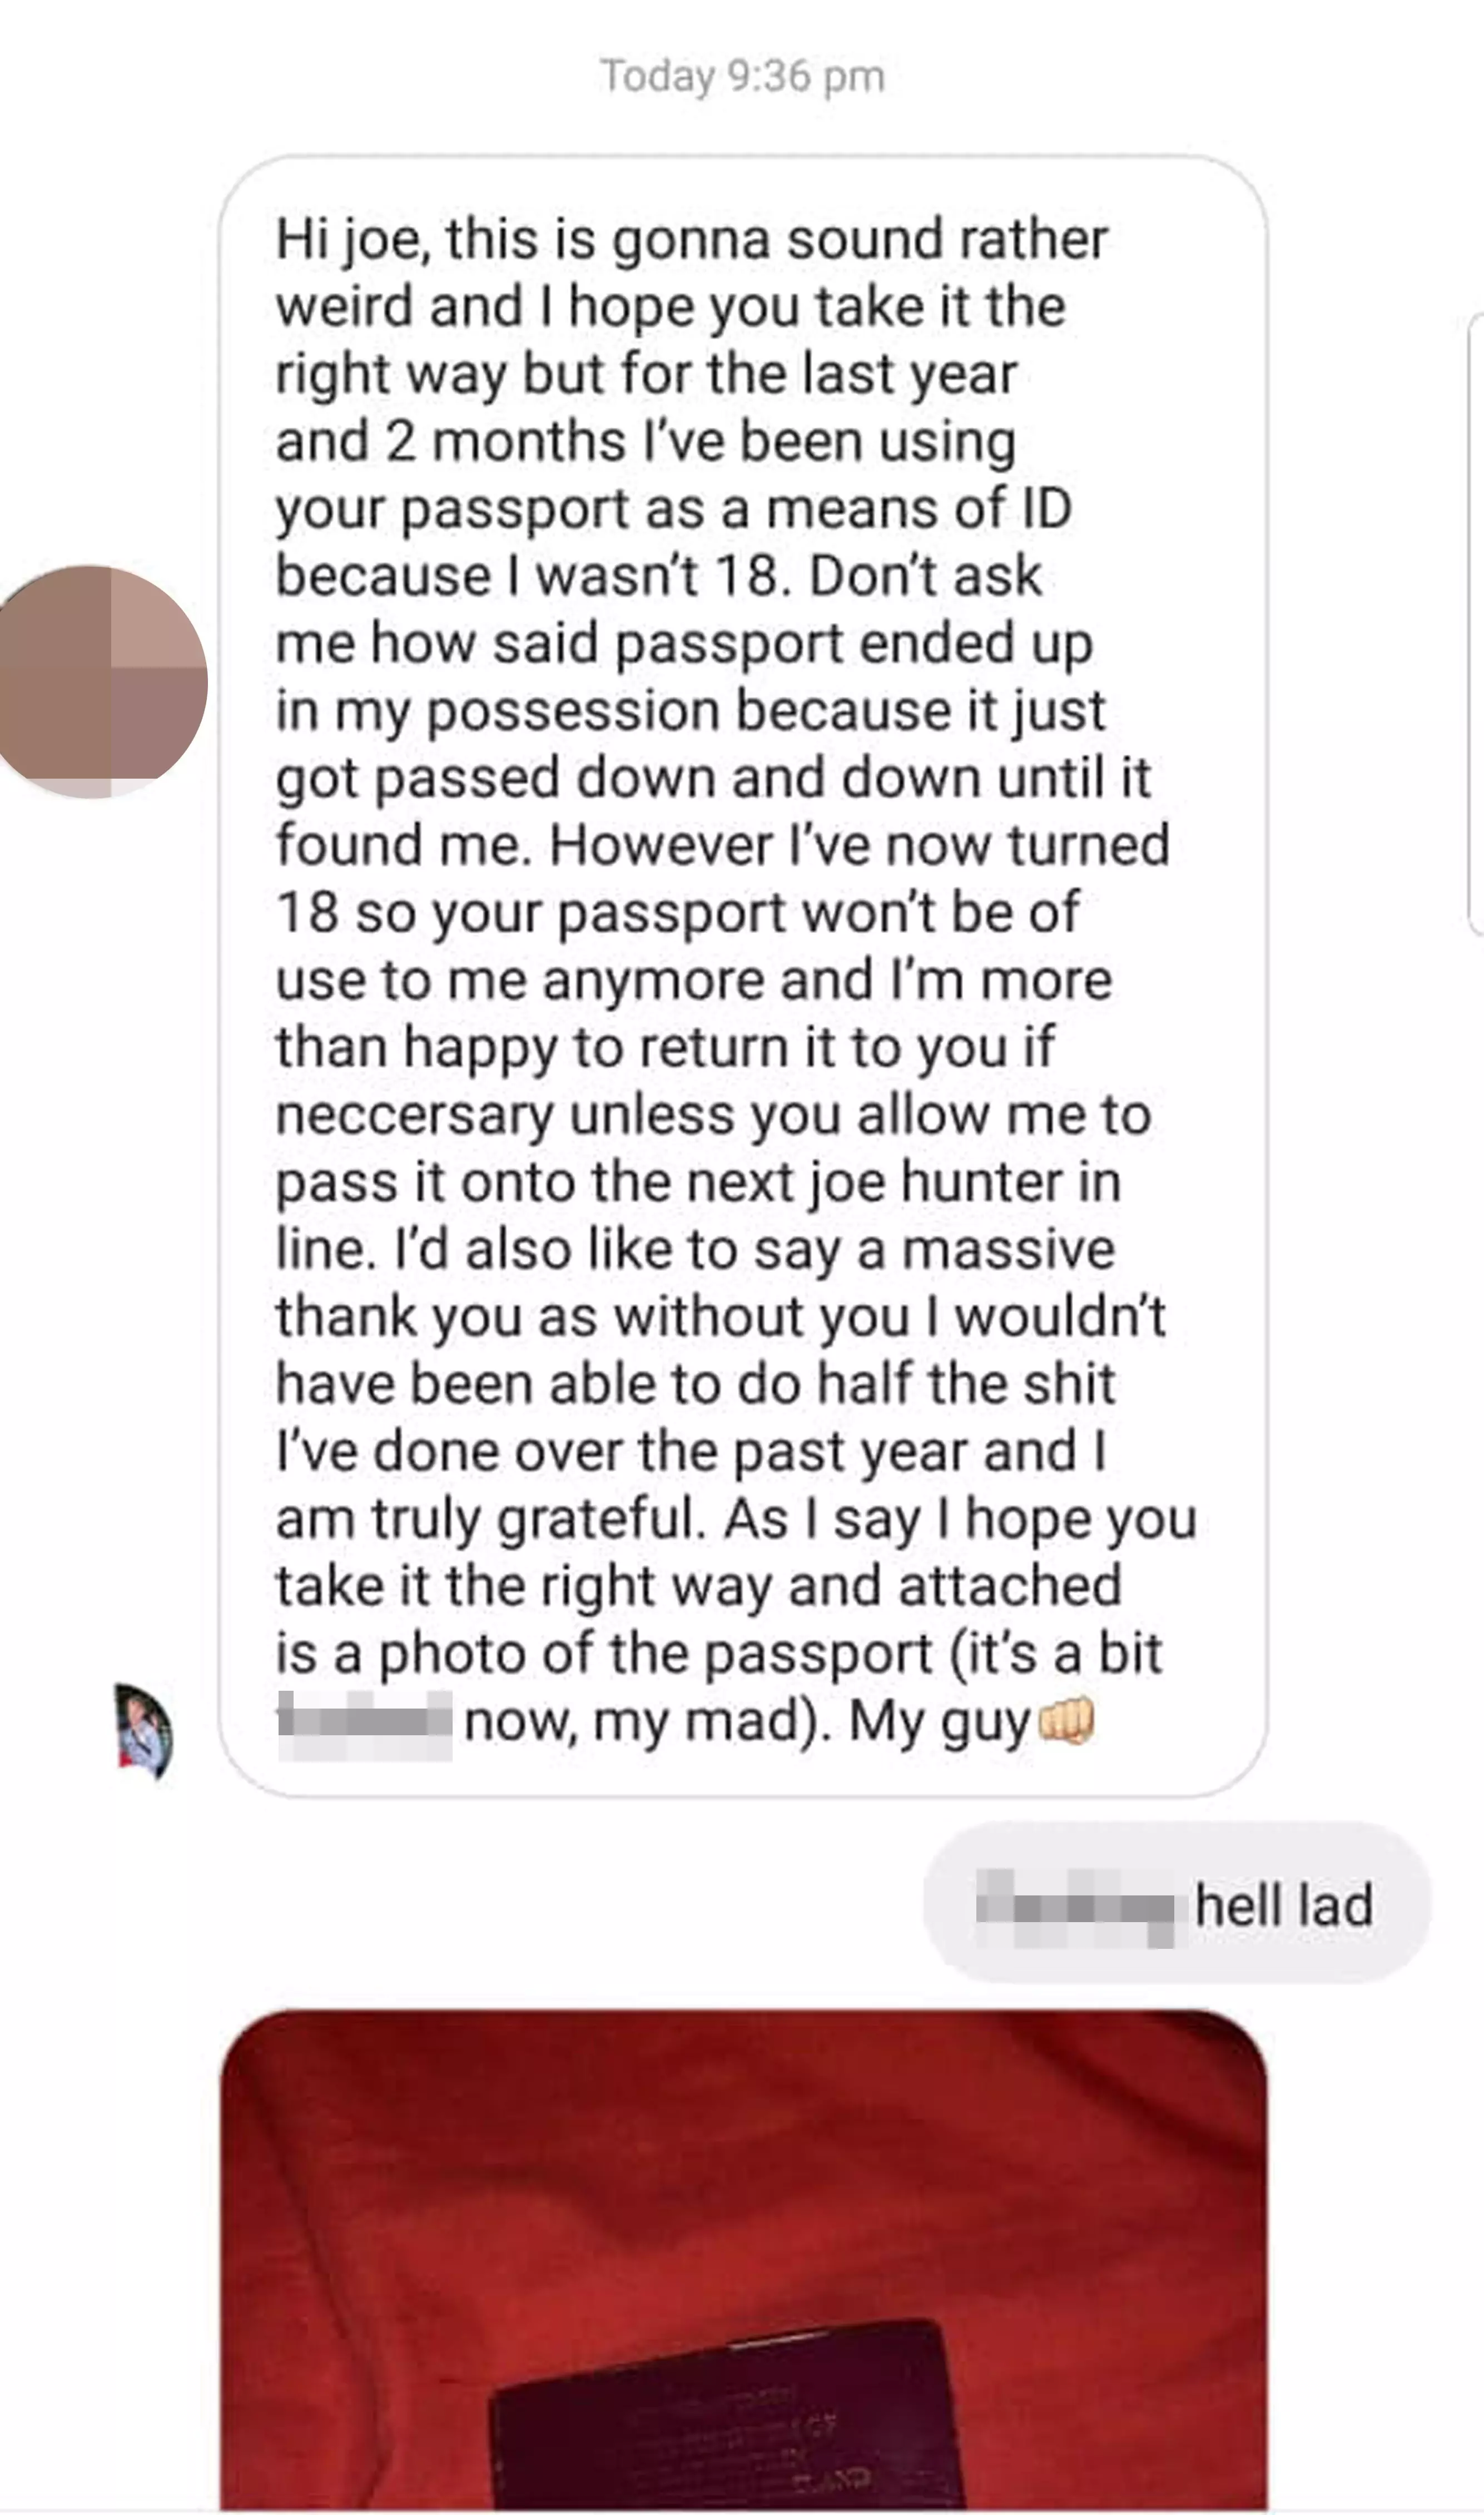 Joe received this hilarious message from the passport thief.